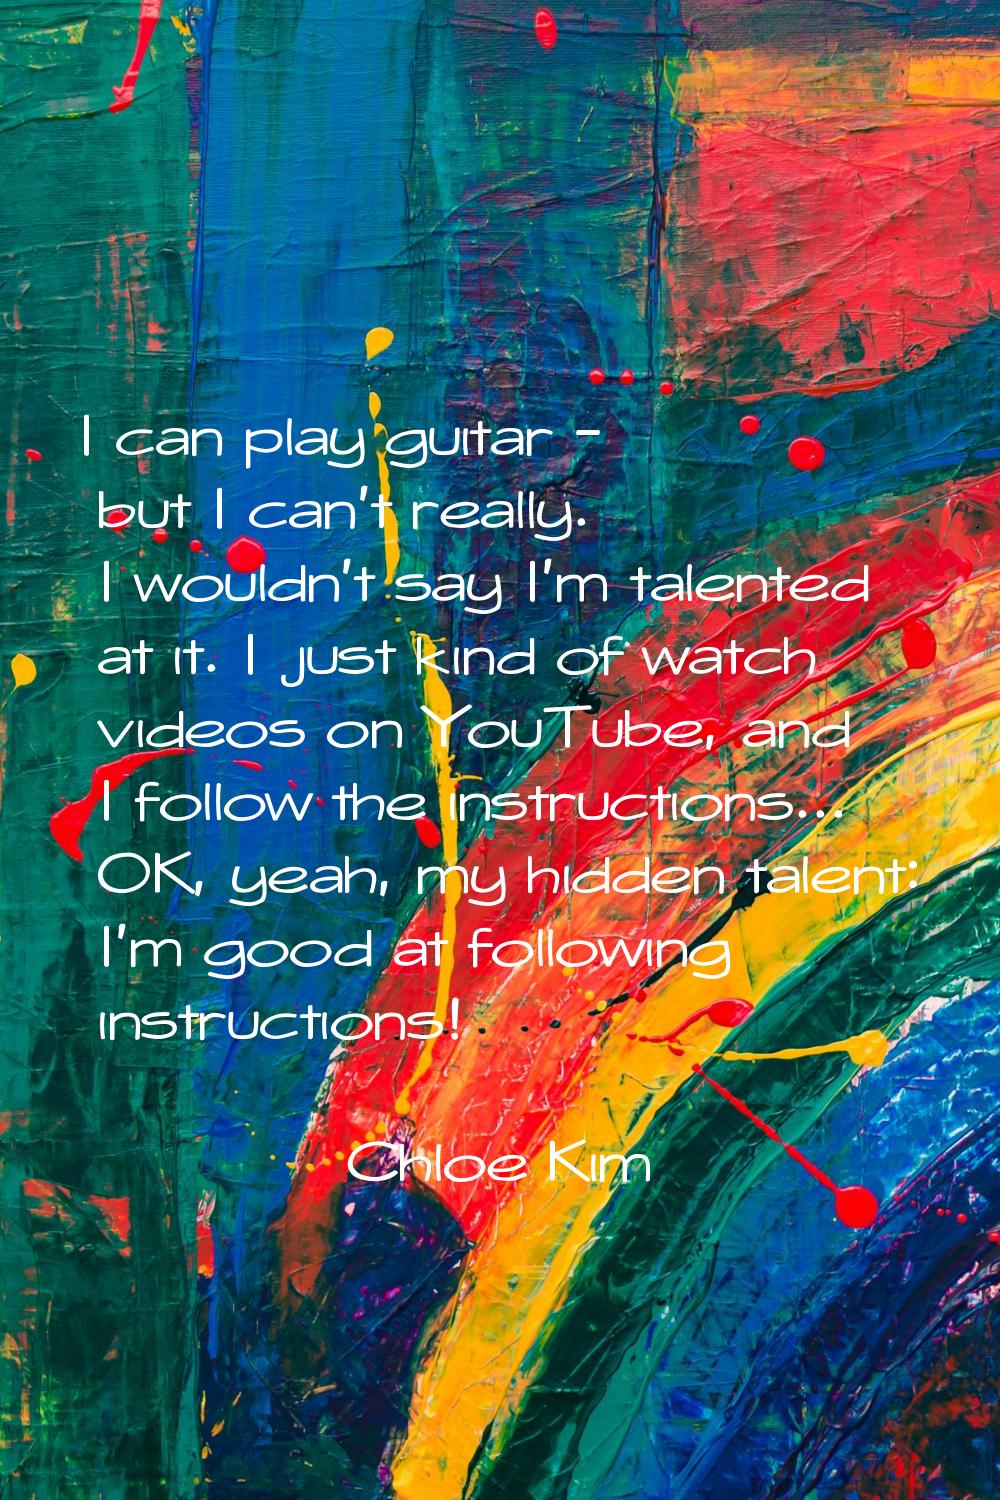 I can play guitar - but I can't really. I wouldn't say I'm talented at it. I just kind of watch vid